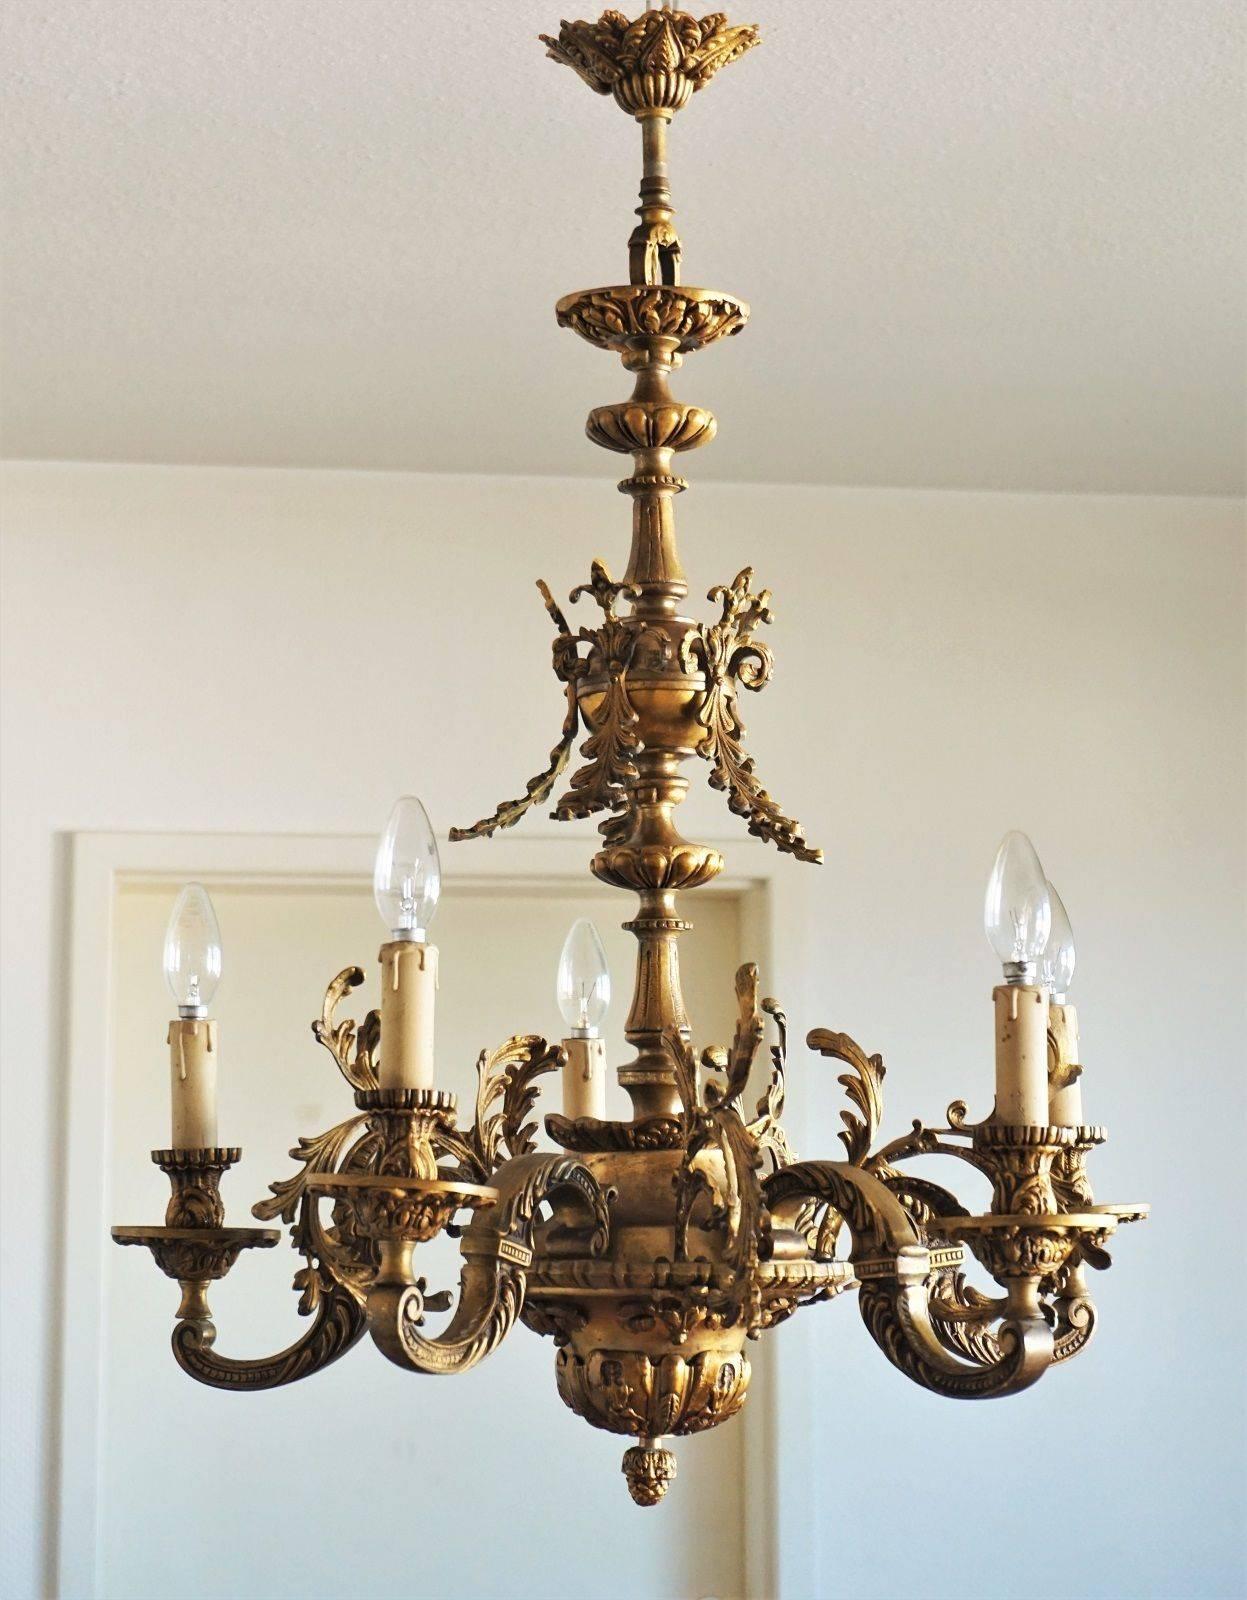 Louis XVI style solid gilt bronze five-arm chandelier extremely ornate with great details, France, circa 1870-1880. Beautiful aged patina to bronze, rewired.
Five E14 bulb holders with candle covers sockets.
Measures:
Diameter: 27 in / 68.5